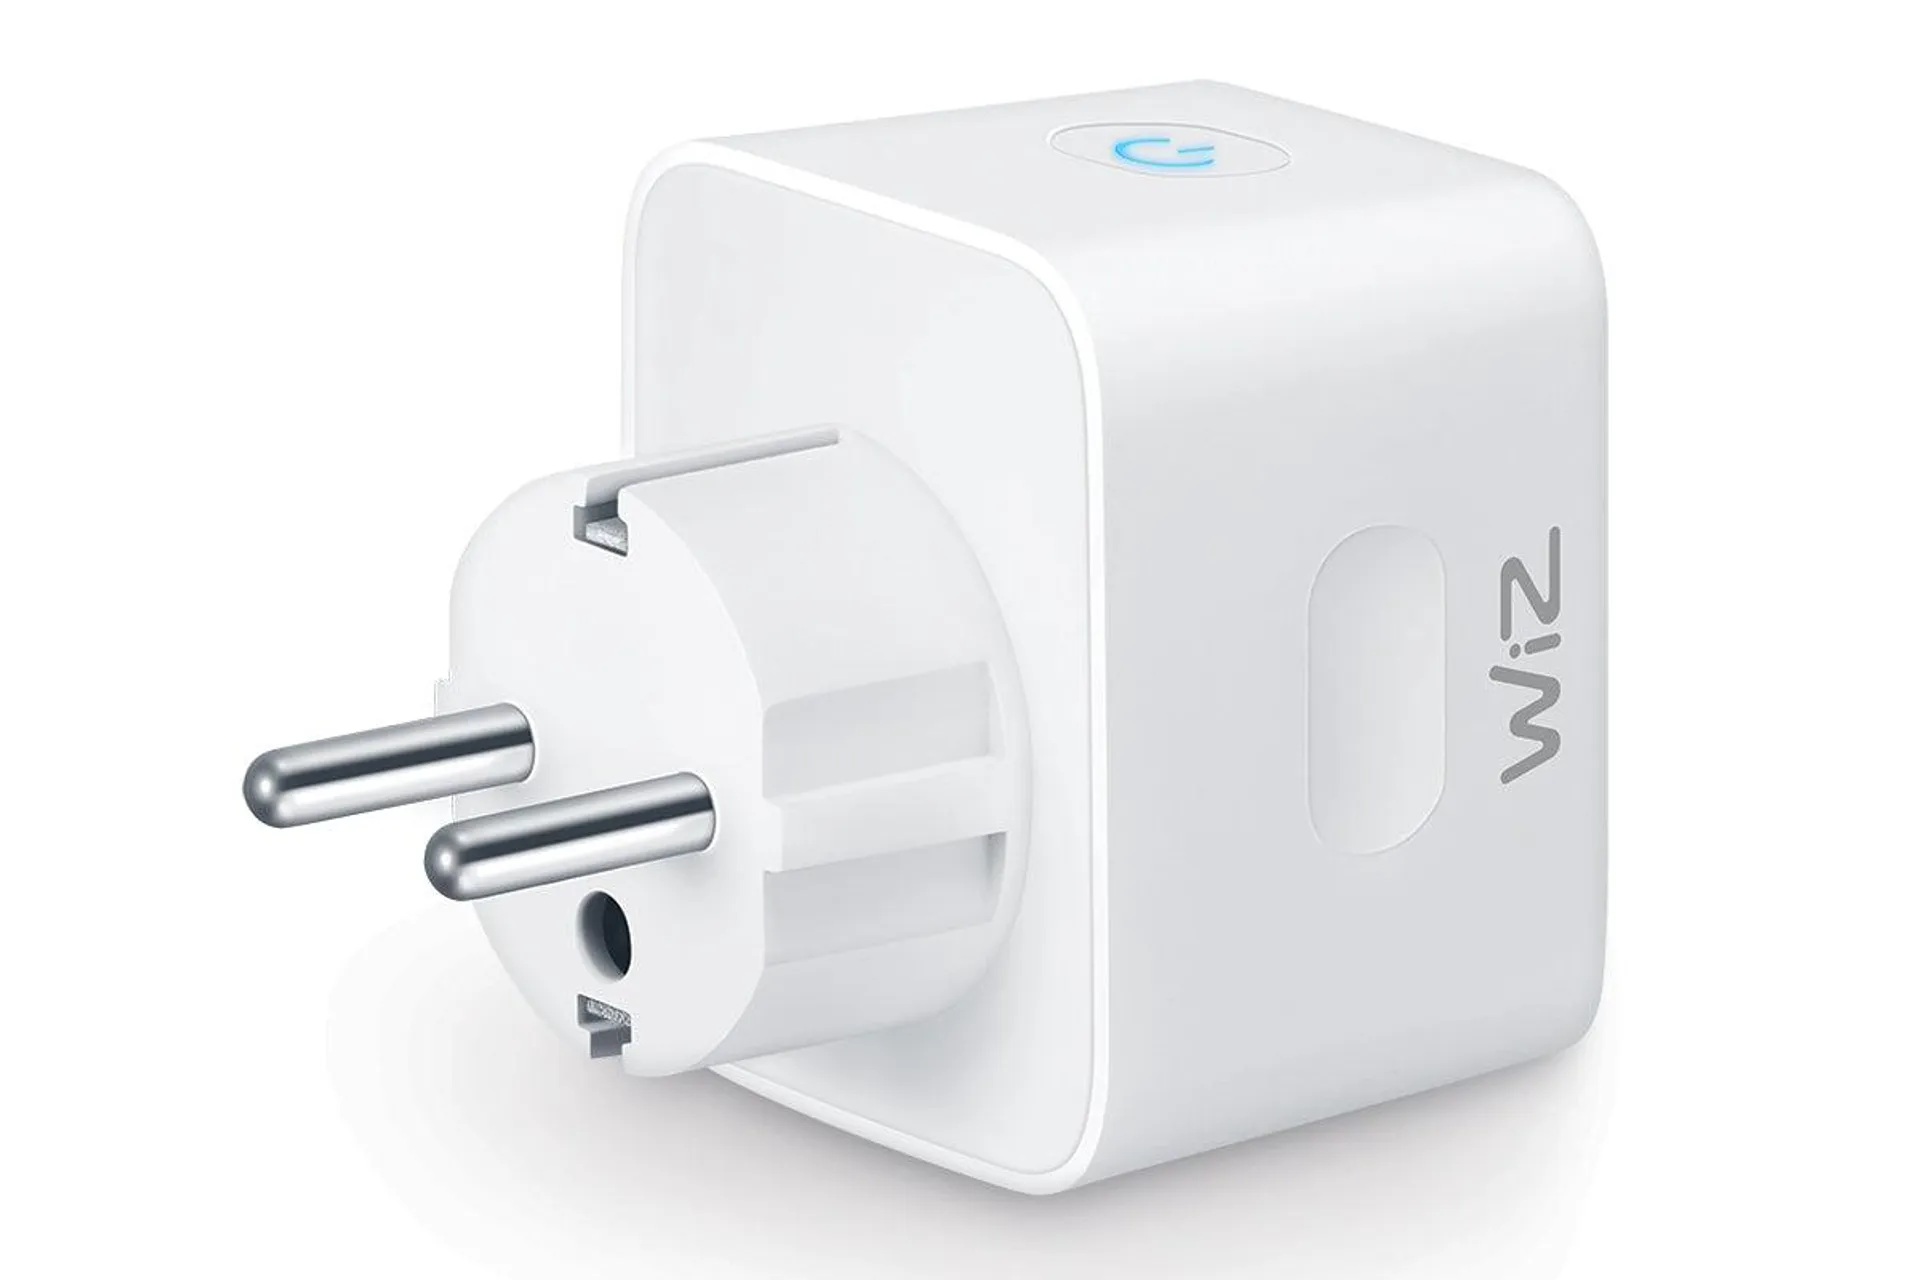 4lite WiZ Connected Type E French Smart Plug